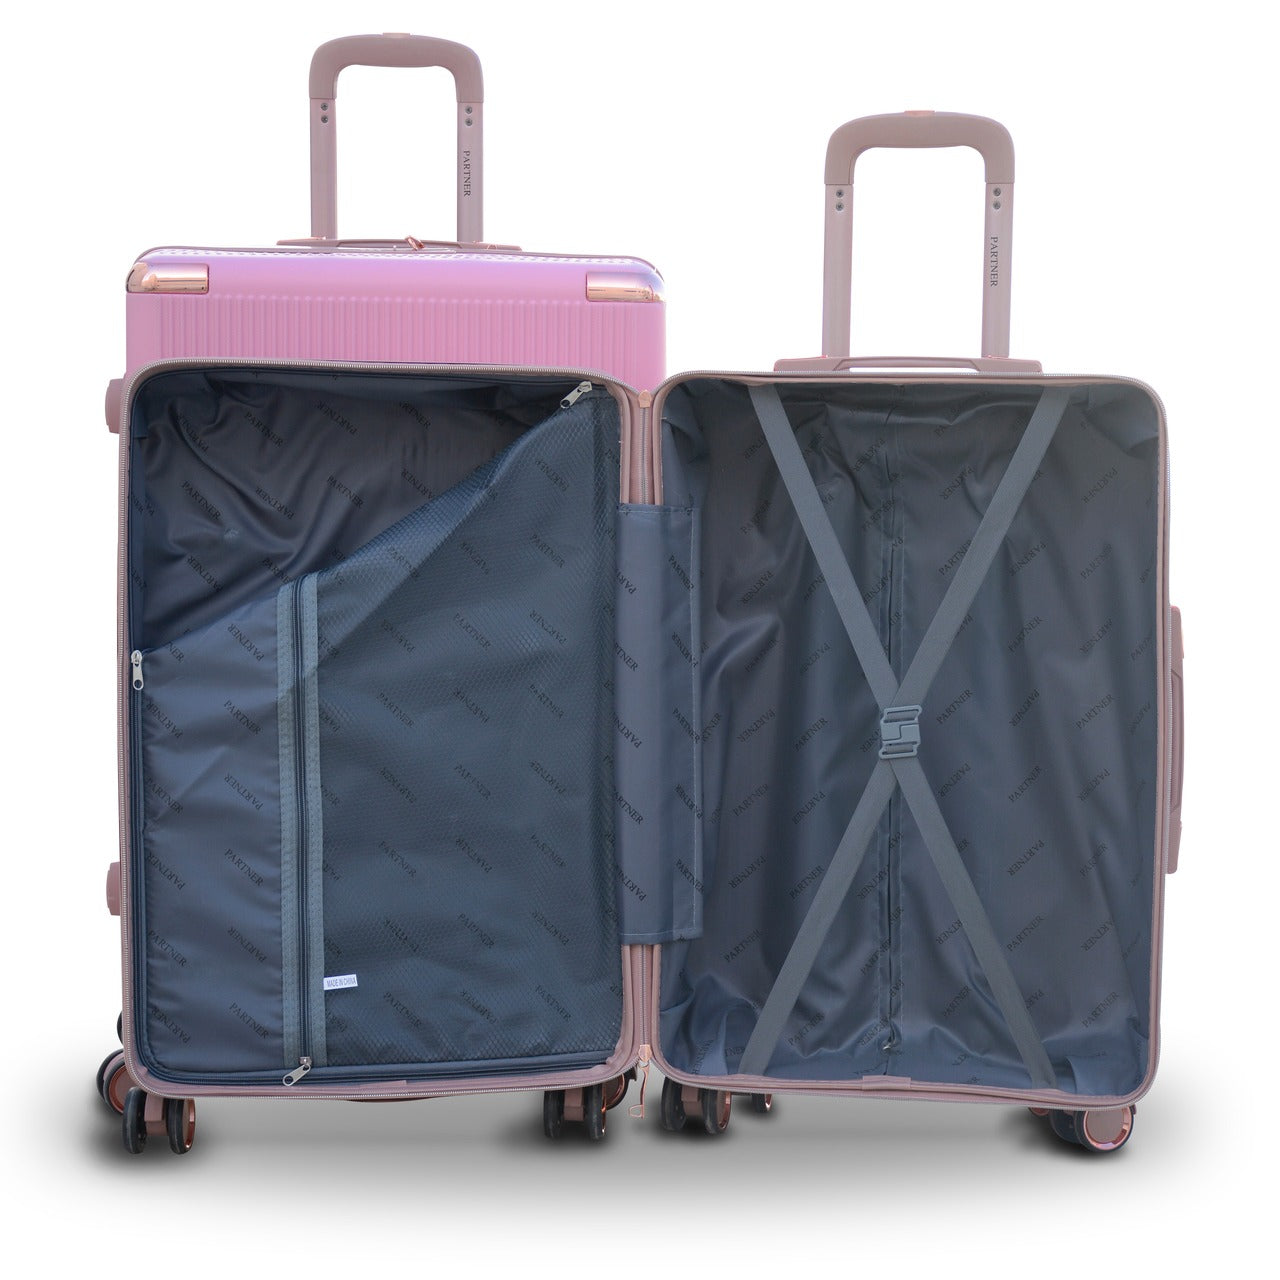 4 Pcs Set 7” 20” 24” 28 Inches Luxury ABS Pink Lightweight Luggage Bag With Double Spinner Wheel